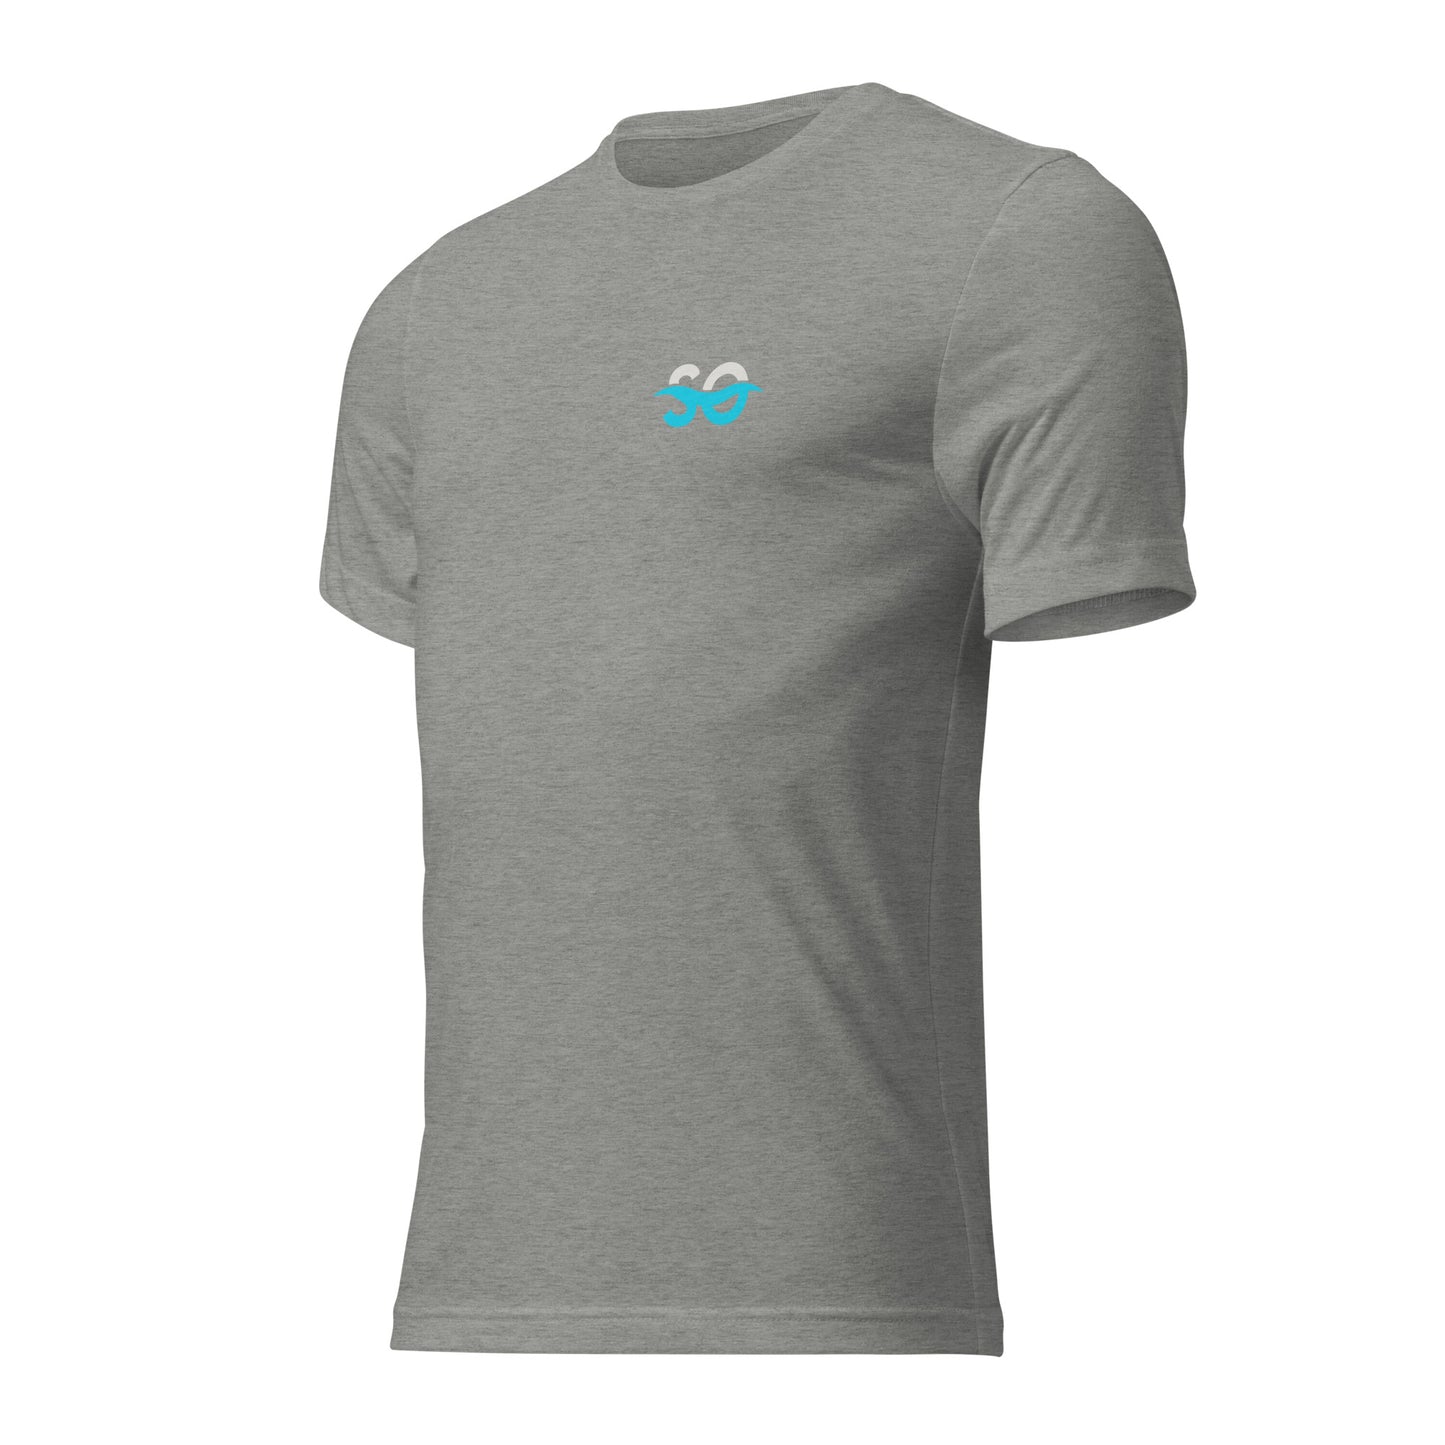 a grey t - shirt with a blue heart on the chest